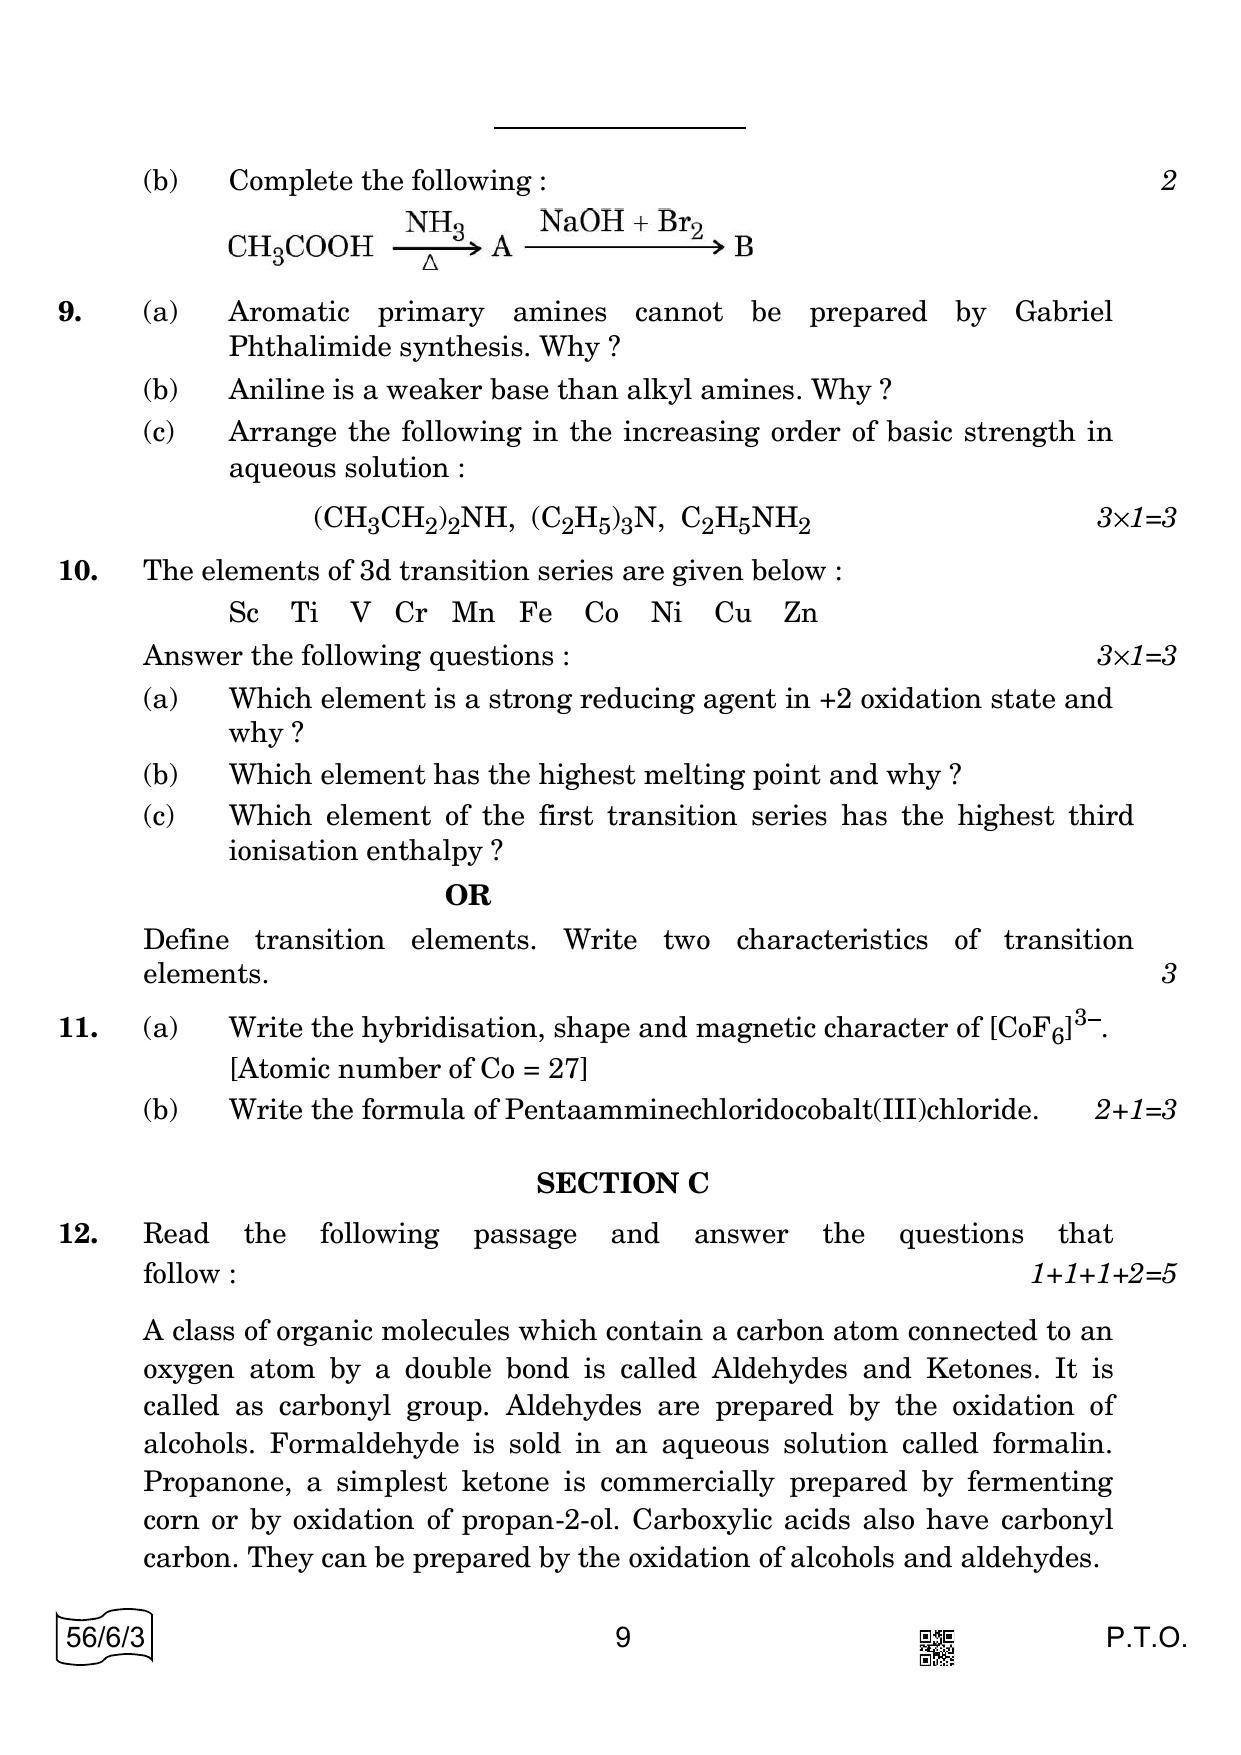 CBSE Class 12 56-6-3 CHEMISTRY 2022 Compartment Question Paper - Page 9